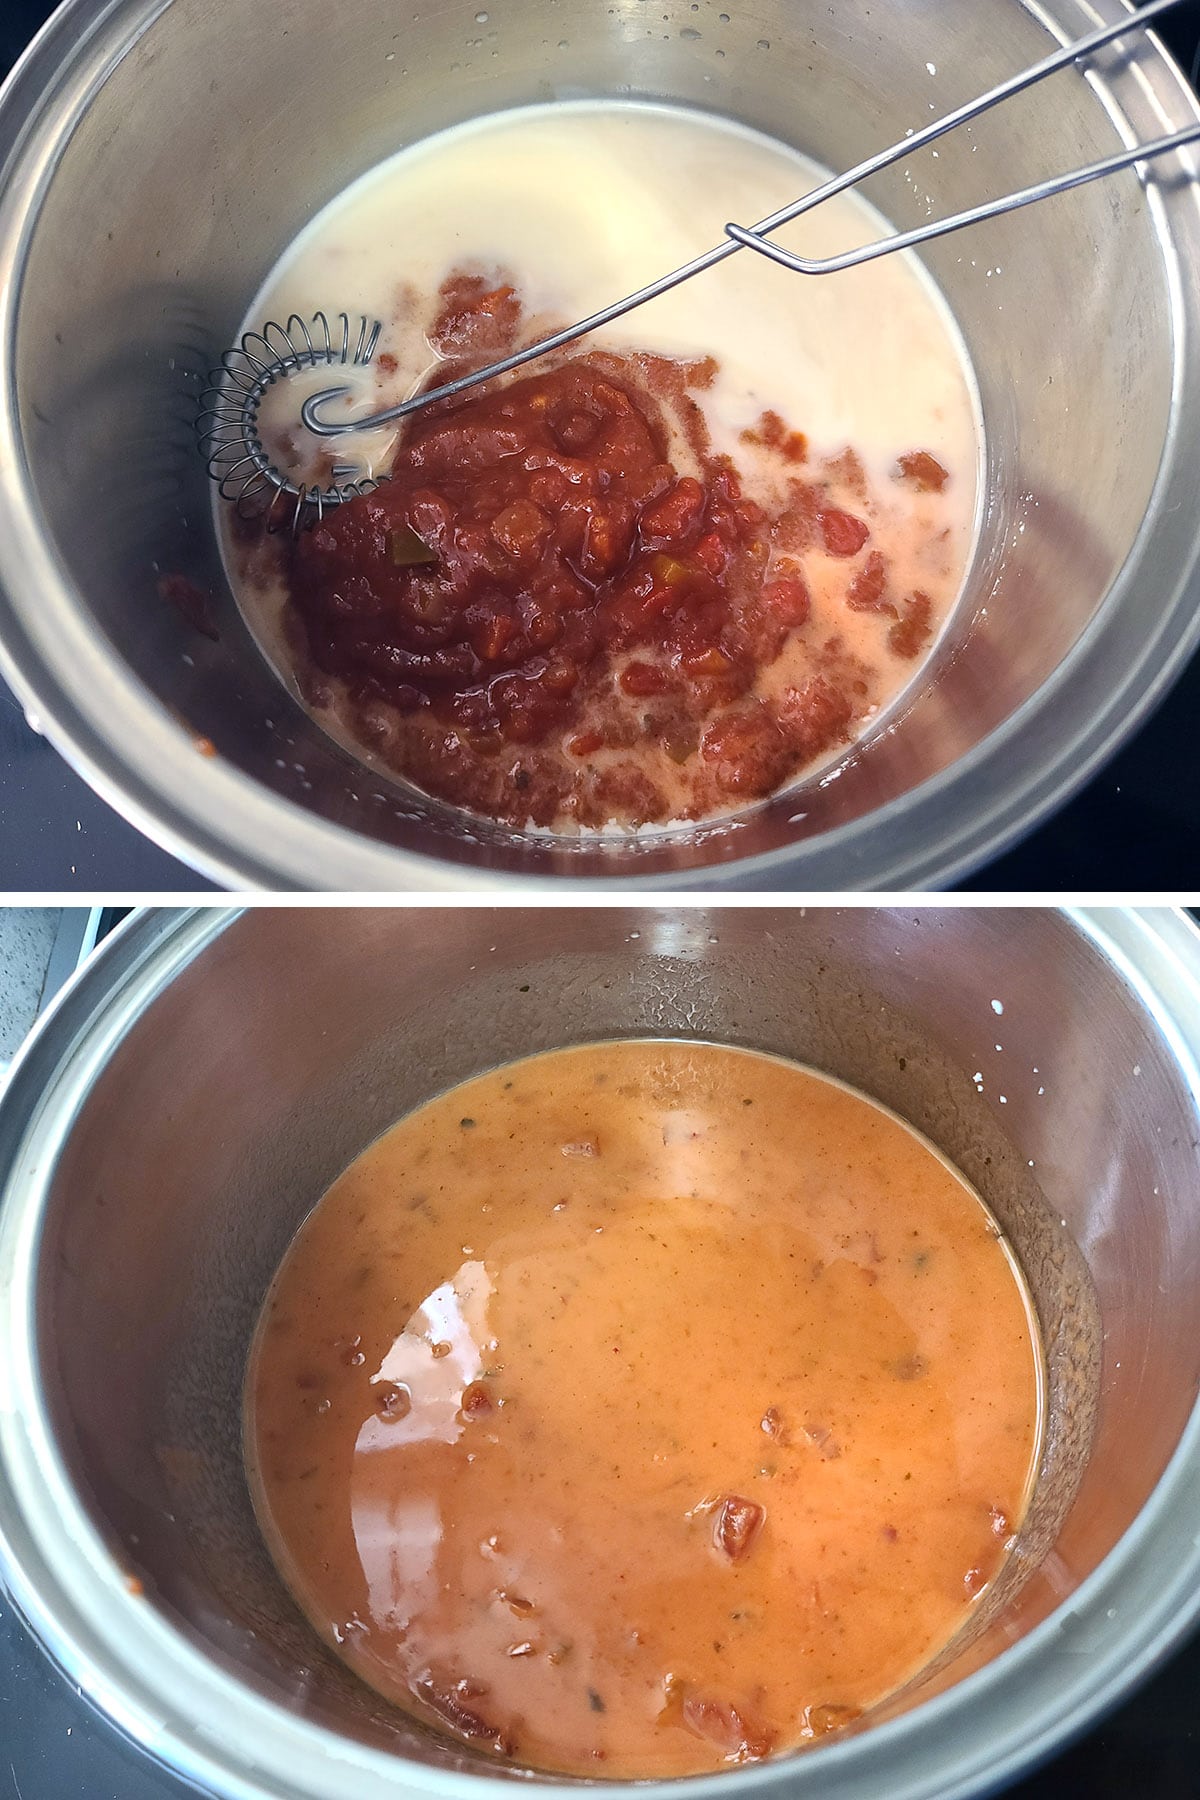 Salsa is added to the beer mixture and stirred in.